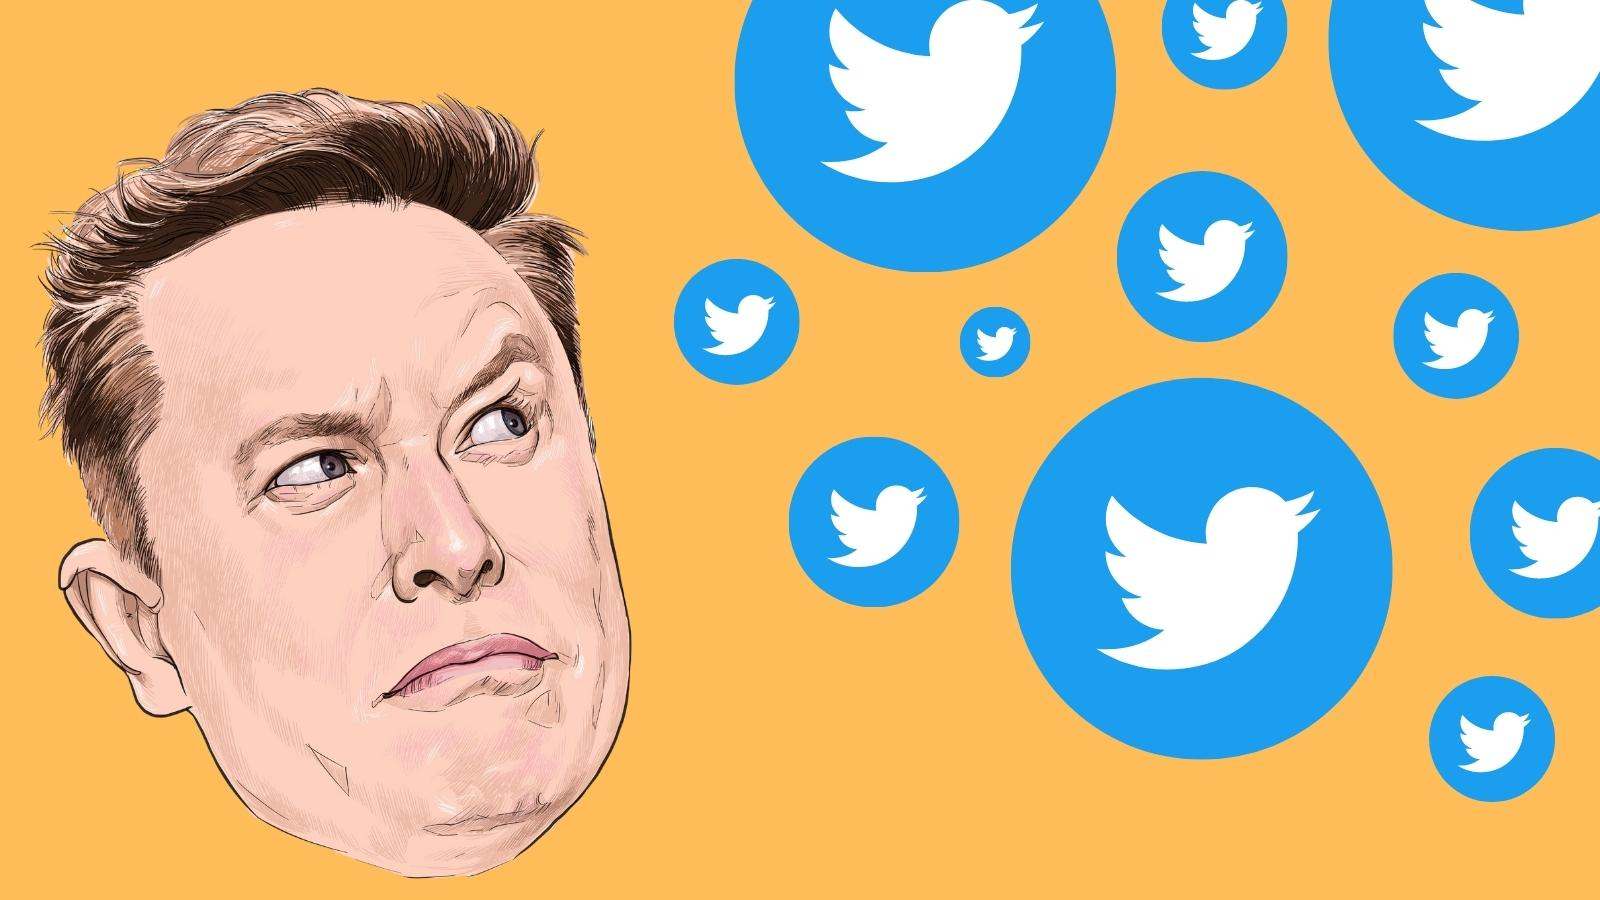 Live blog: Twitter chaos – Elon Musk might reinstate almost all suspended accounts